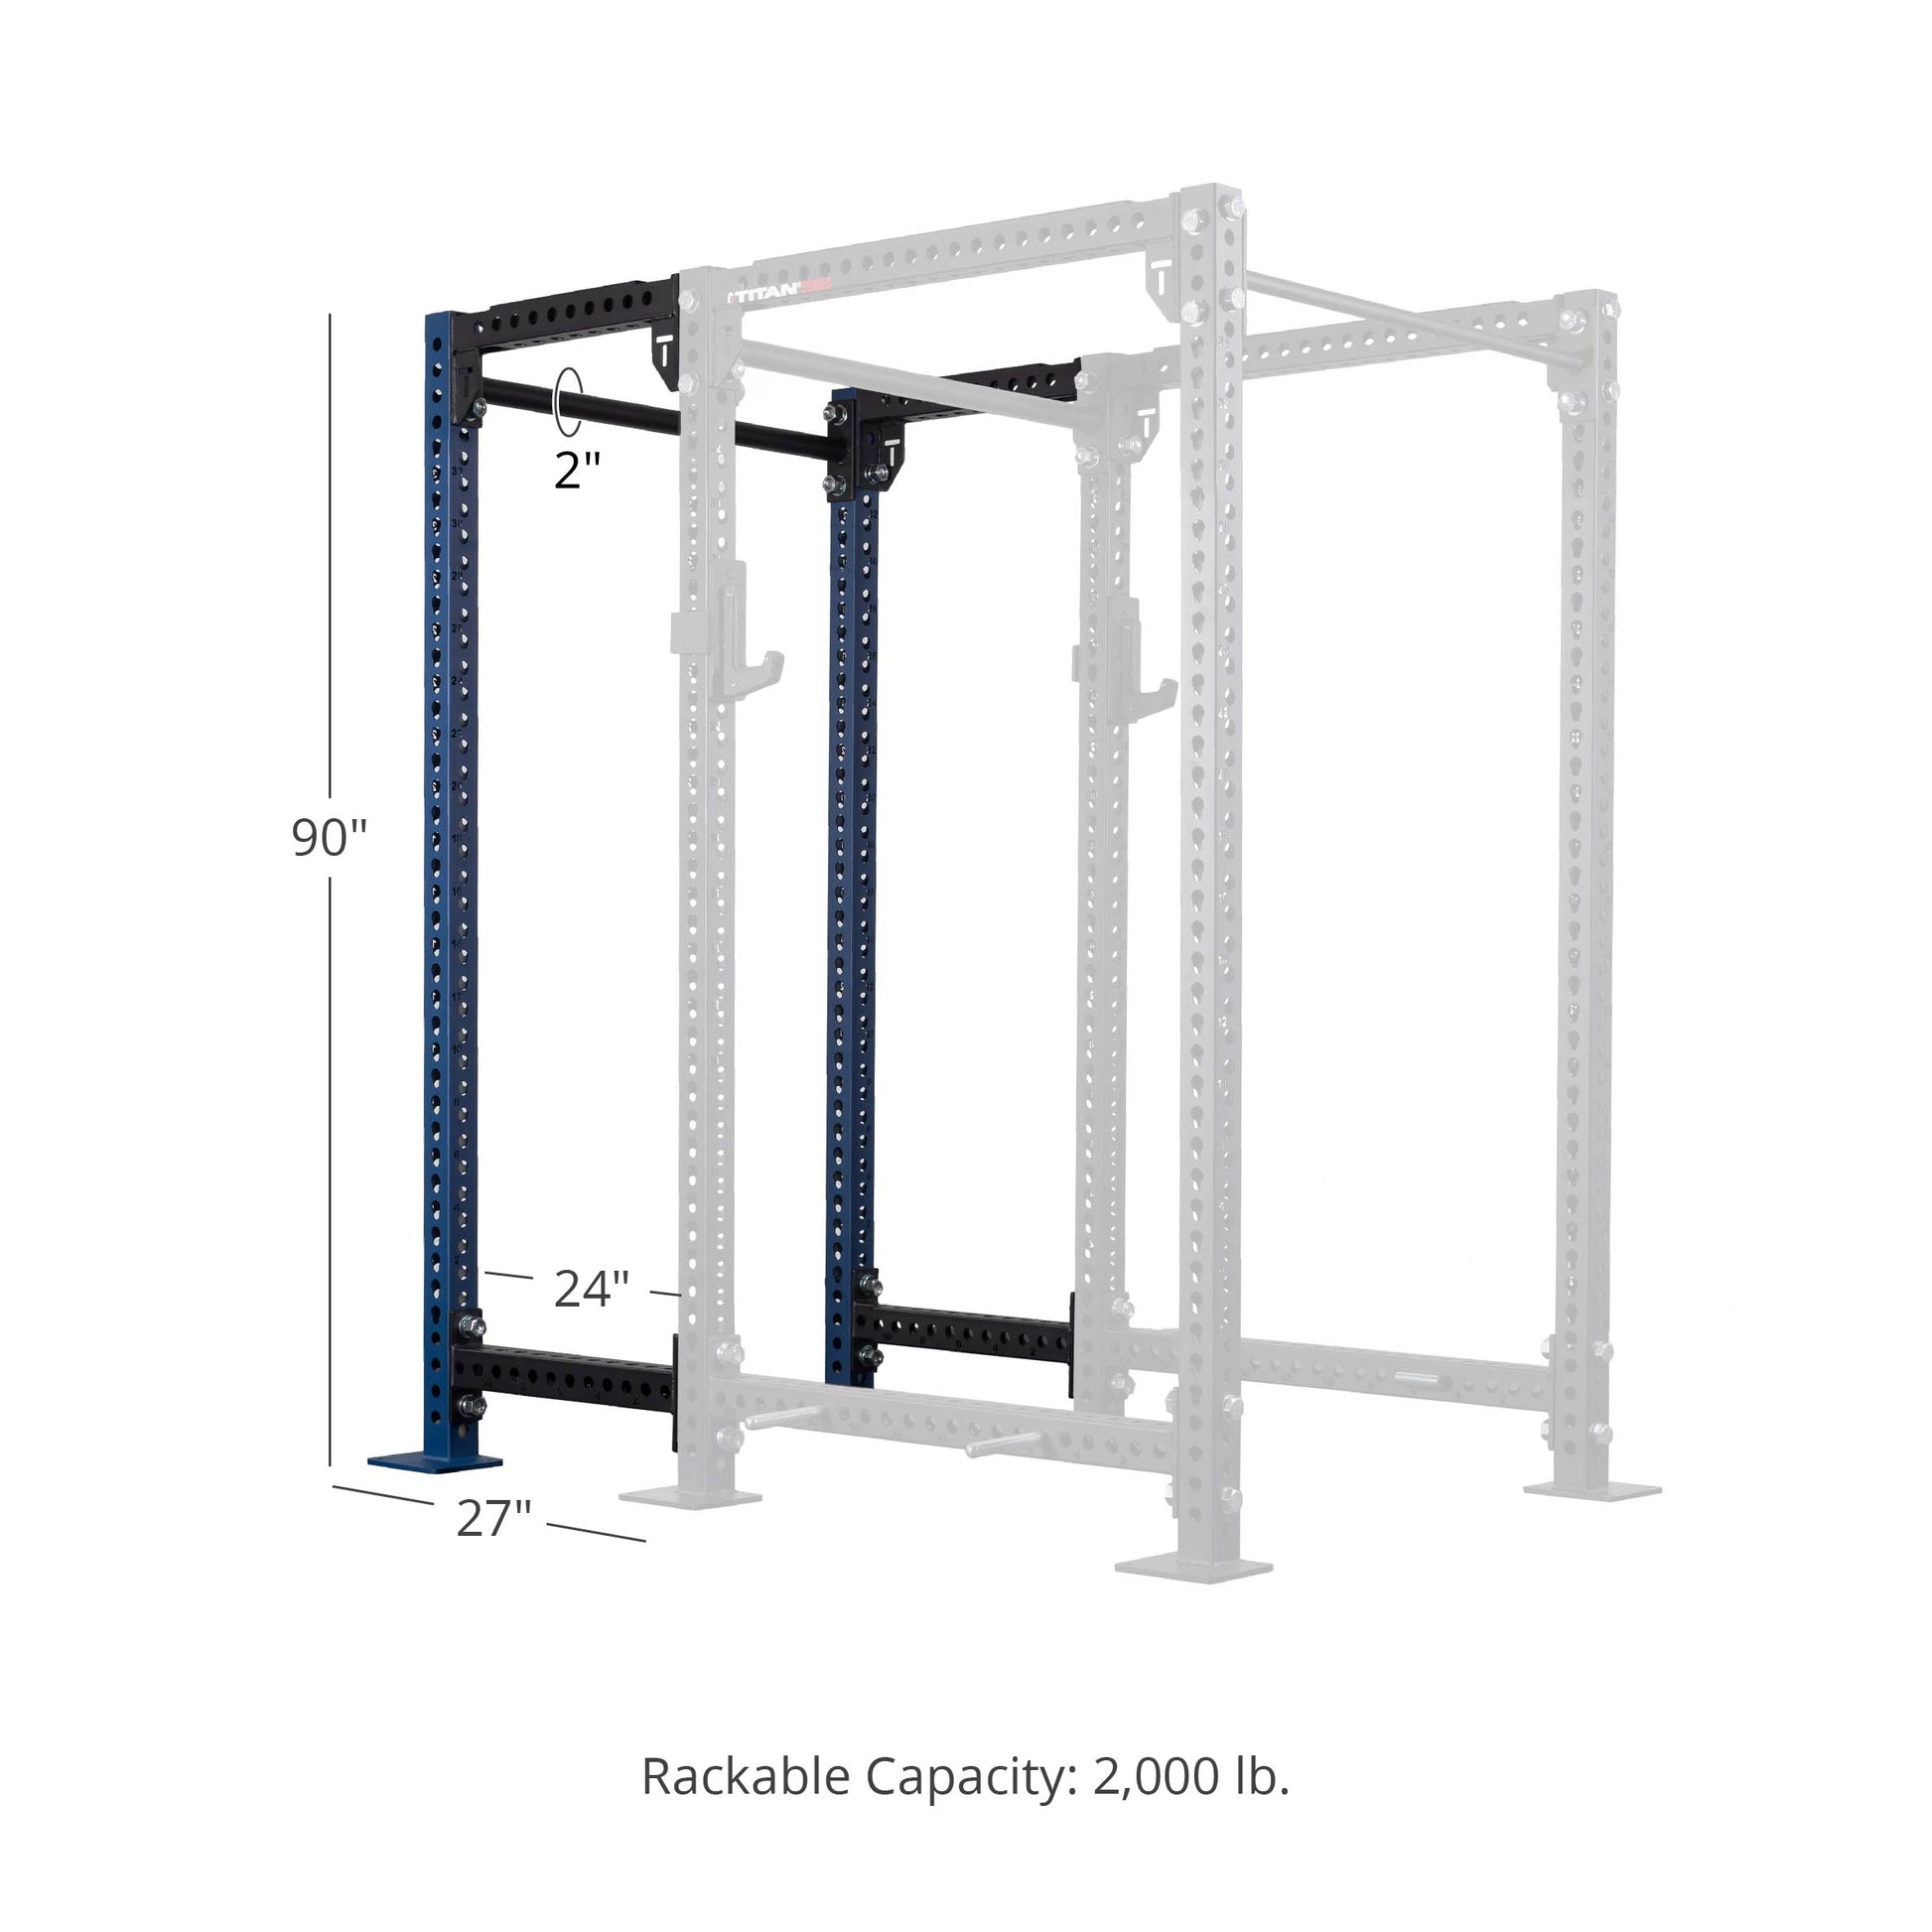 TITAN Series 24" Extension Kit - Extension Color: Navy - Extension Height: 90" - Crossmember: 2" Fat Pull-Up Bar | Navy / 90" / 2" Fat Pull-Up Bar